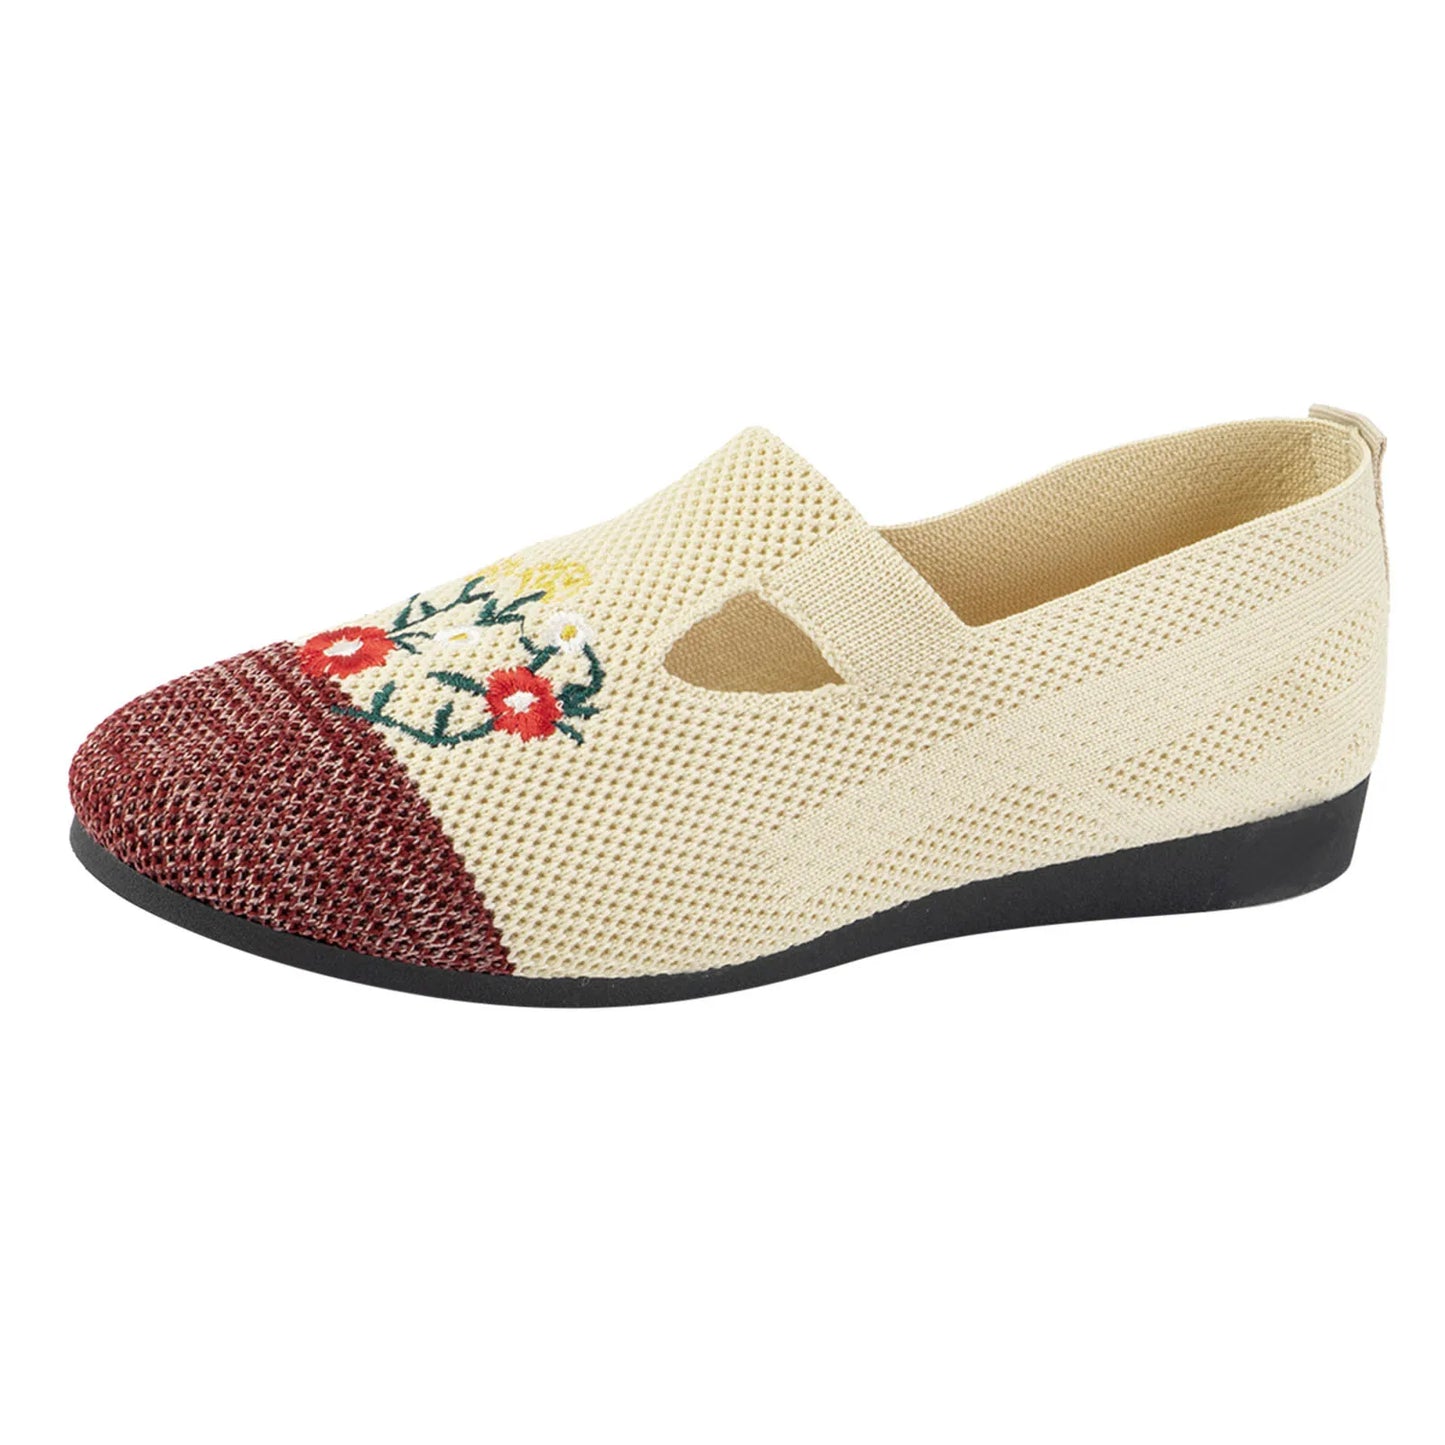 Ladies Mesh Knitted Shoes Fashion/Breathable Flower Embroidery Flat Bottom Casual